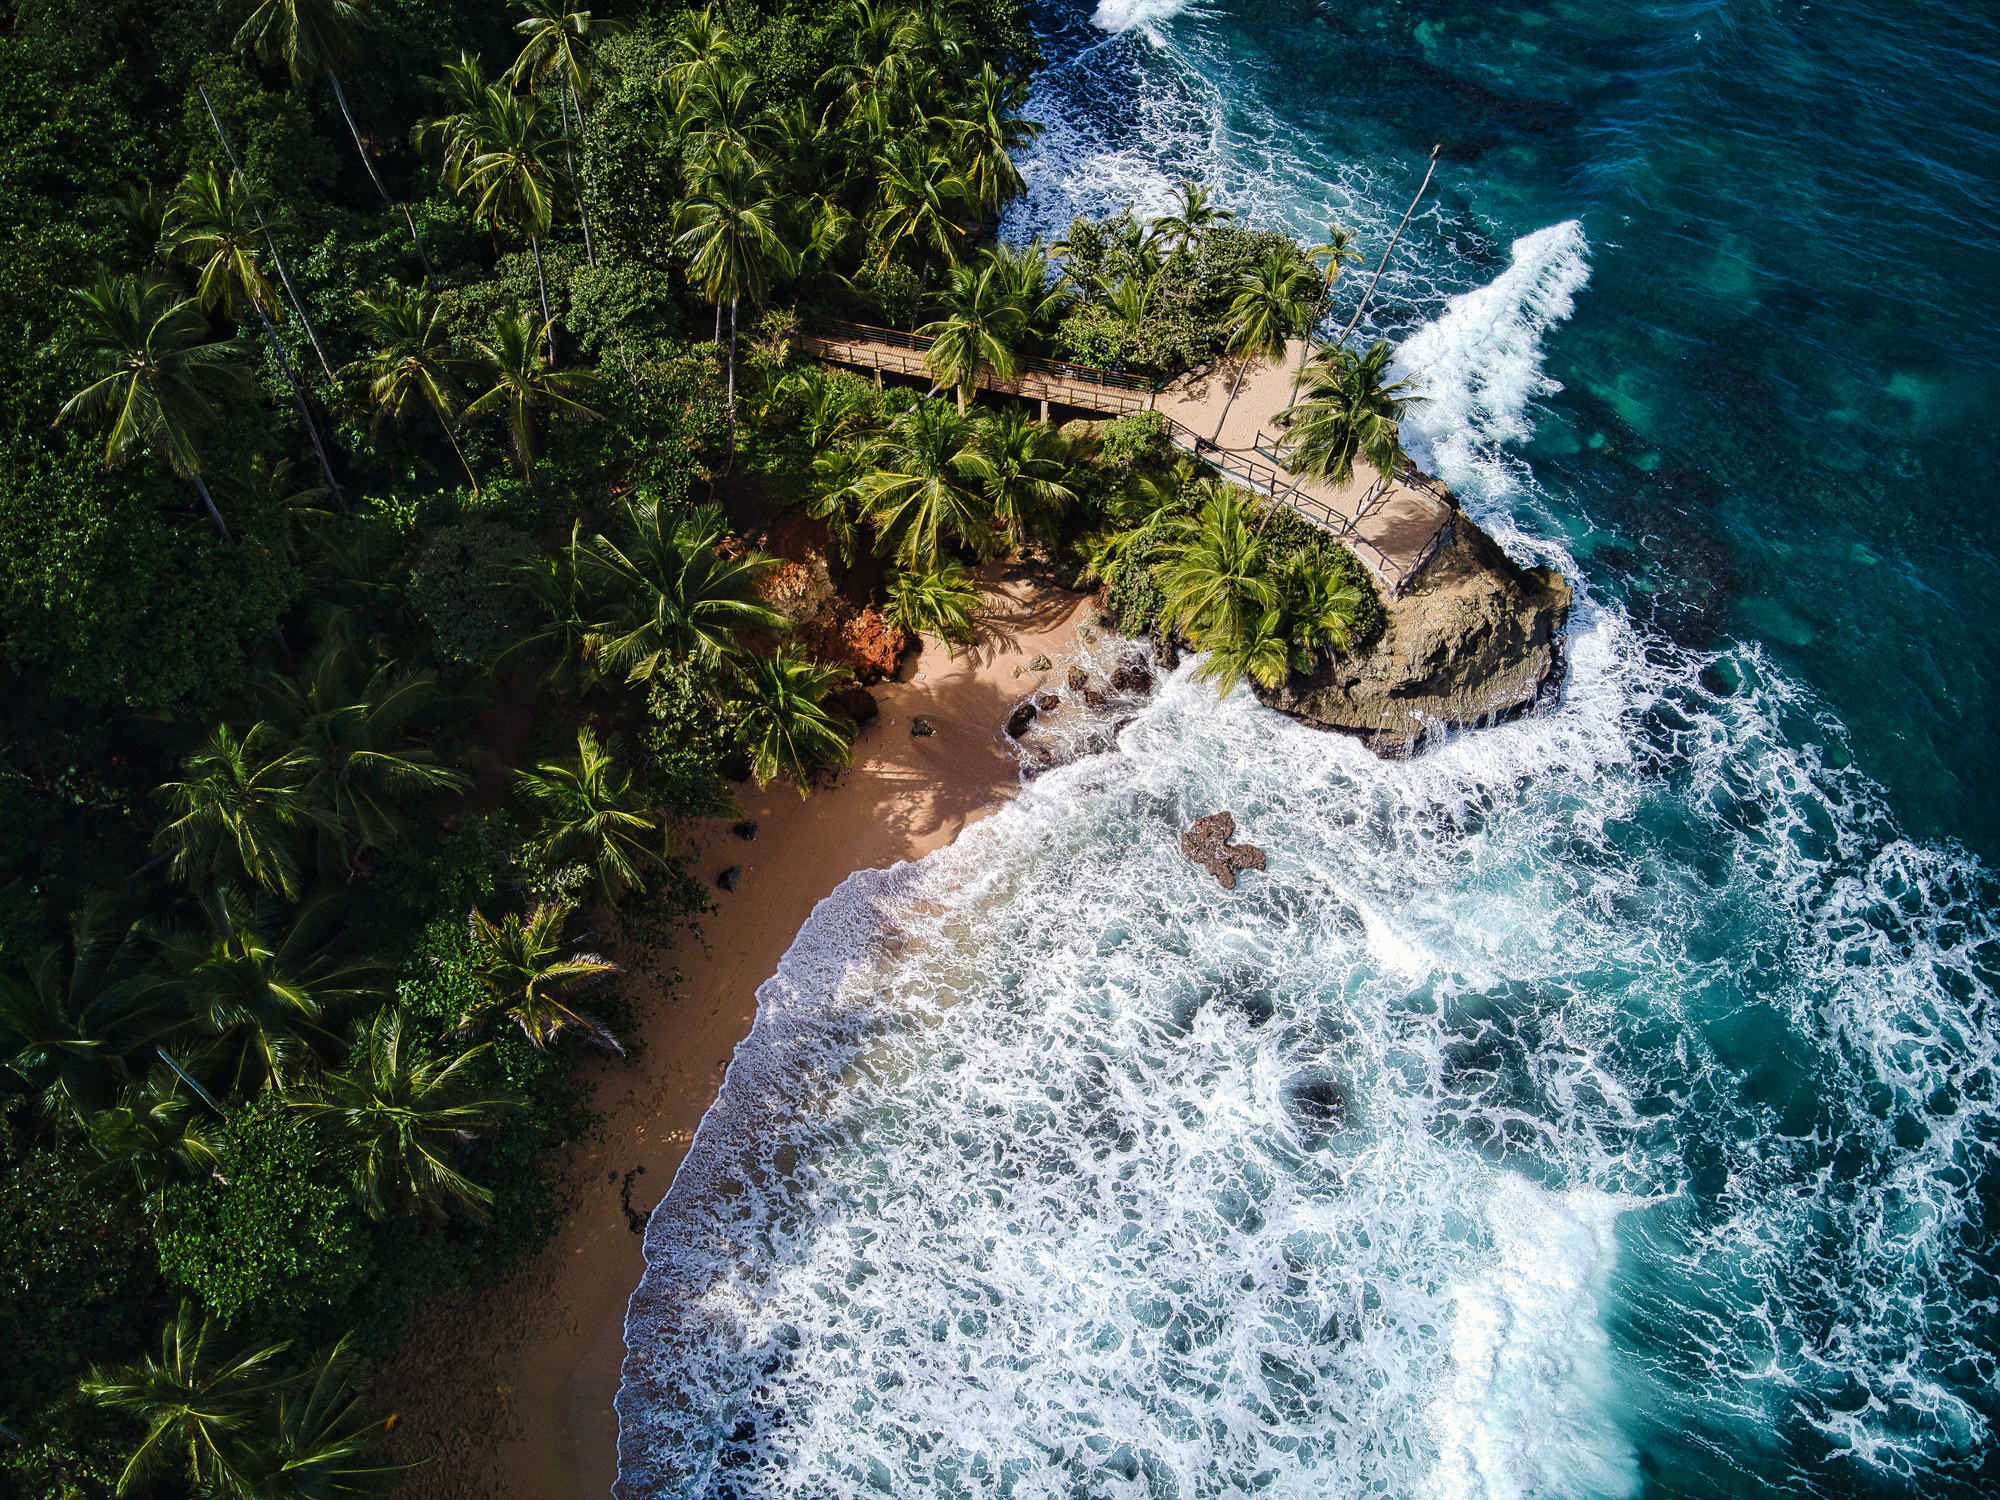 An aerial view of jungle meeting sea in Costa Rica.